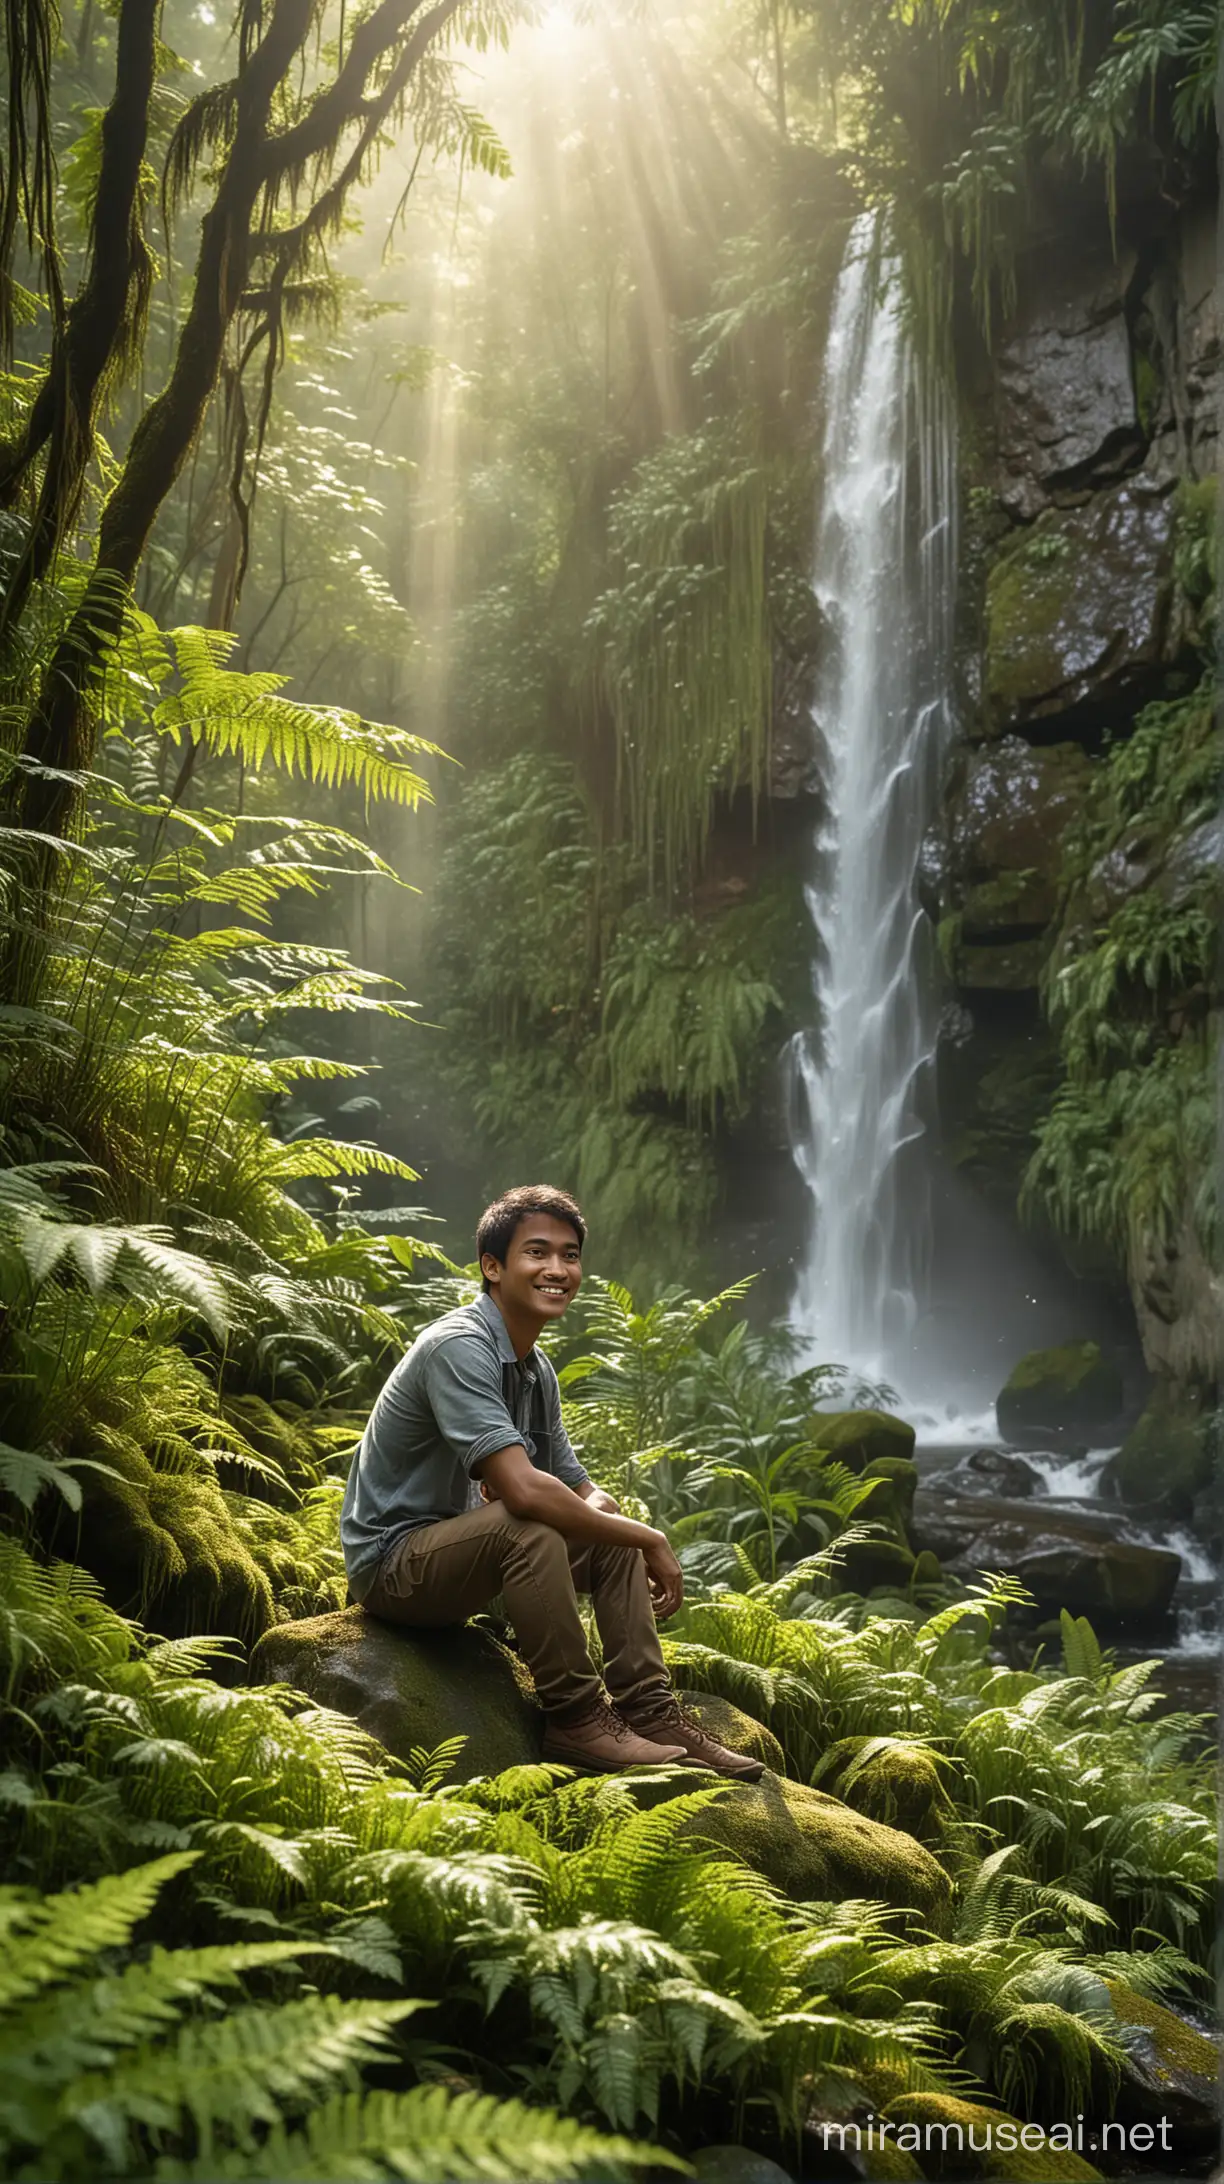 Young Indonesian man sitting on a rock, facing the front camera with a smile in the middle of a forest filled with sunlight, sunlight penetrating between the leaves. Delicate dewdrops cling to ferns and wildflowers. In the background, a mystical waterfall cascades down moss-covered rocks, and mist rises into the air. High resolution, high realism.